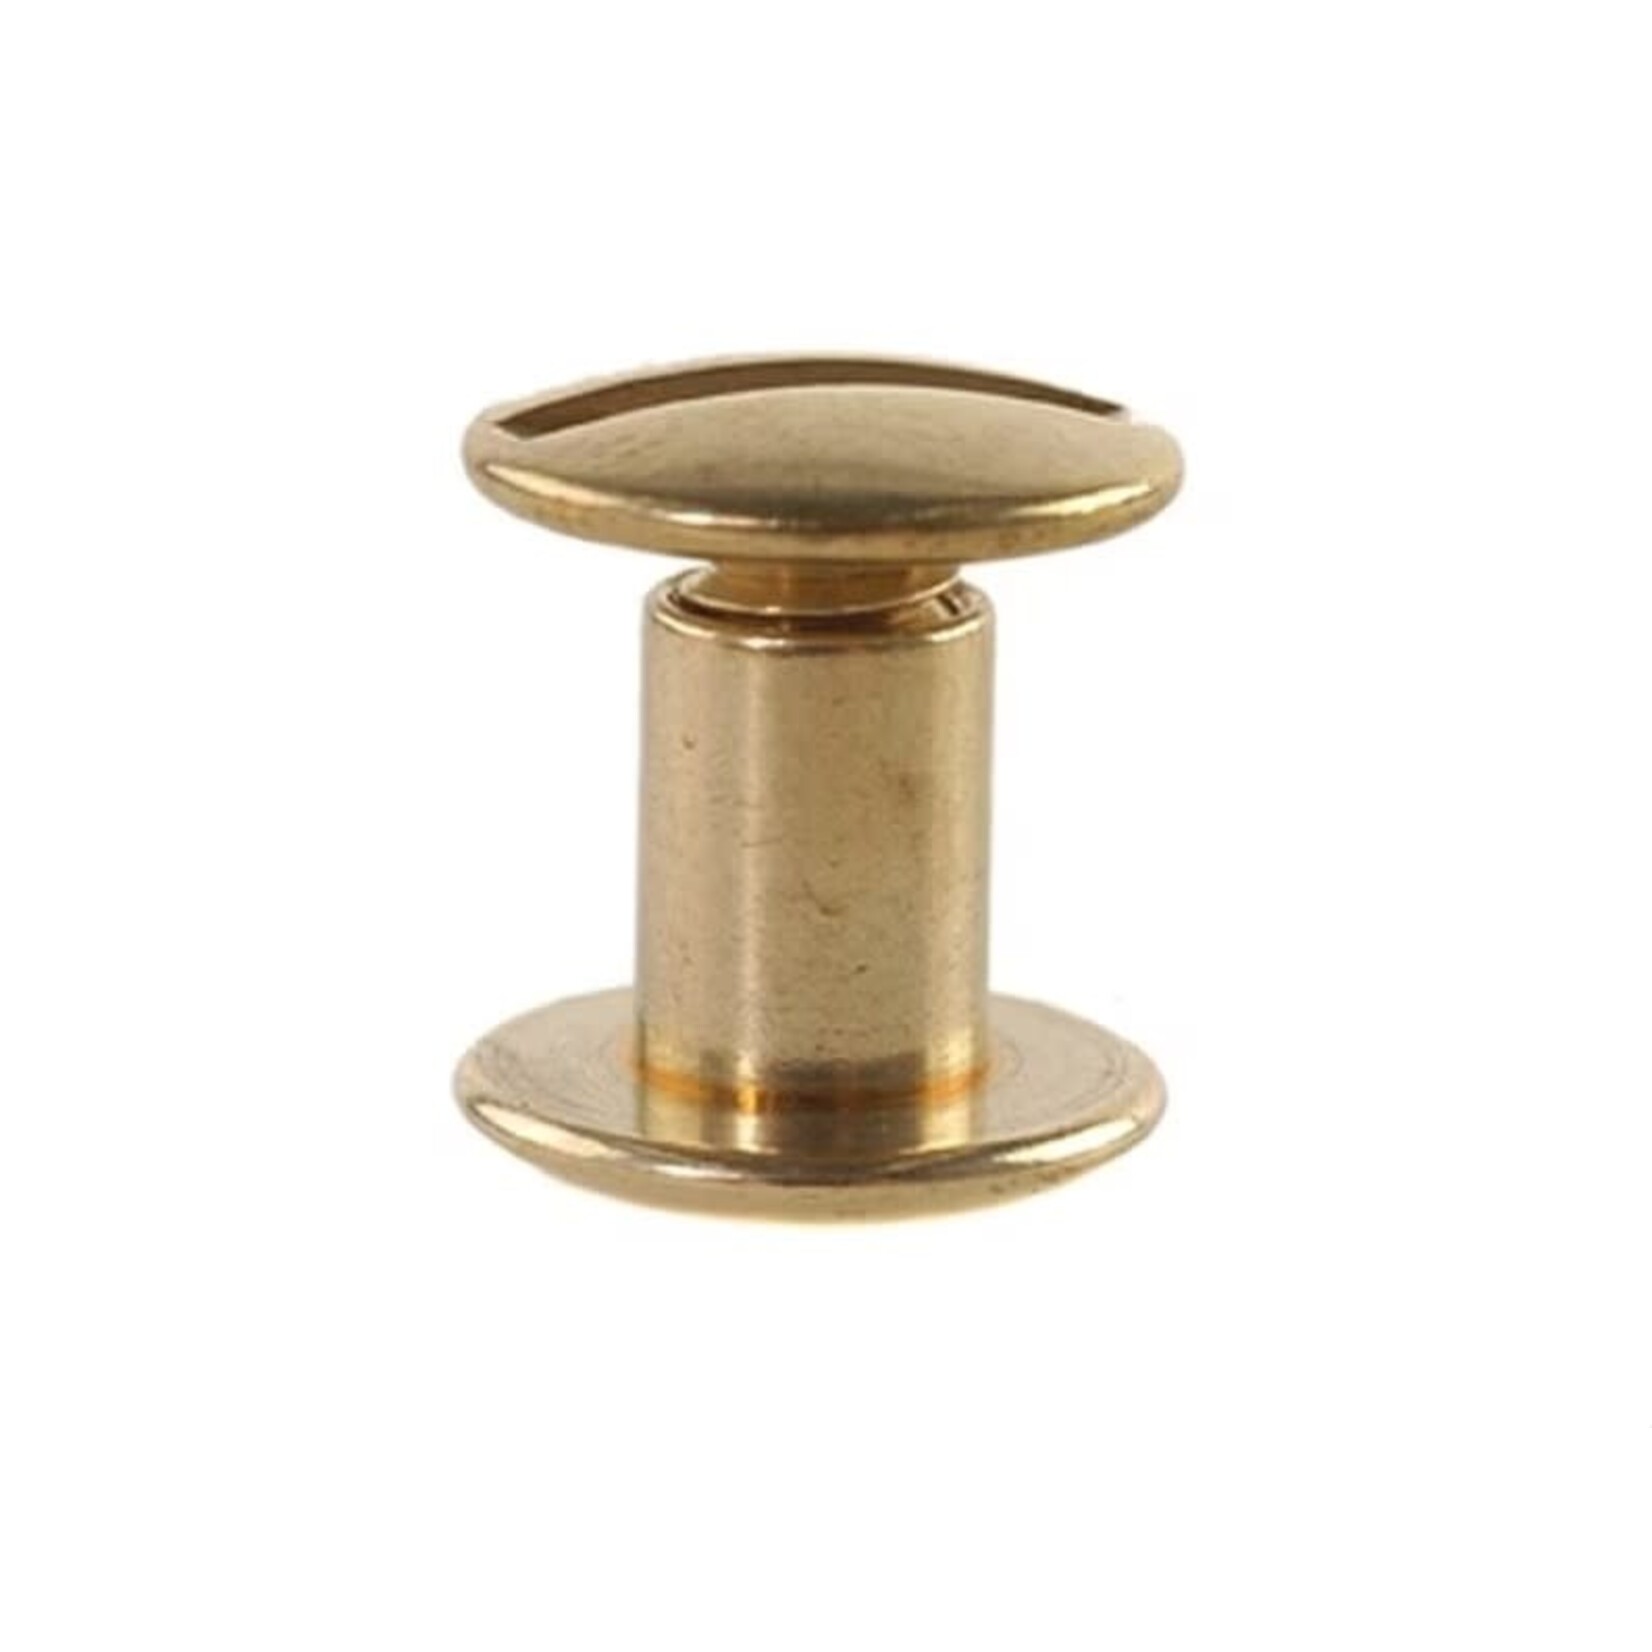 Uncle Mike's Uncle Mike's Brass Chicago Screw 1 pk